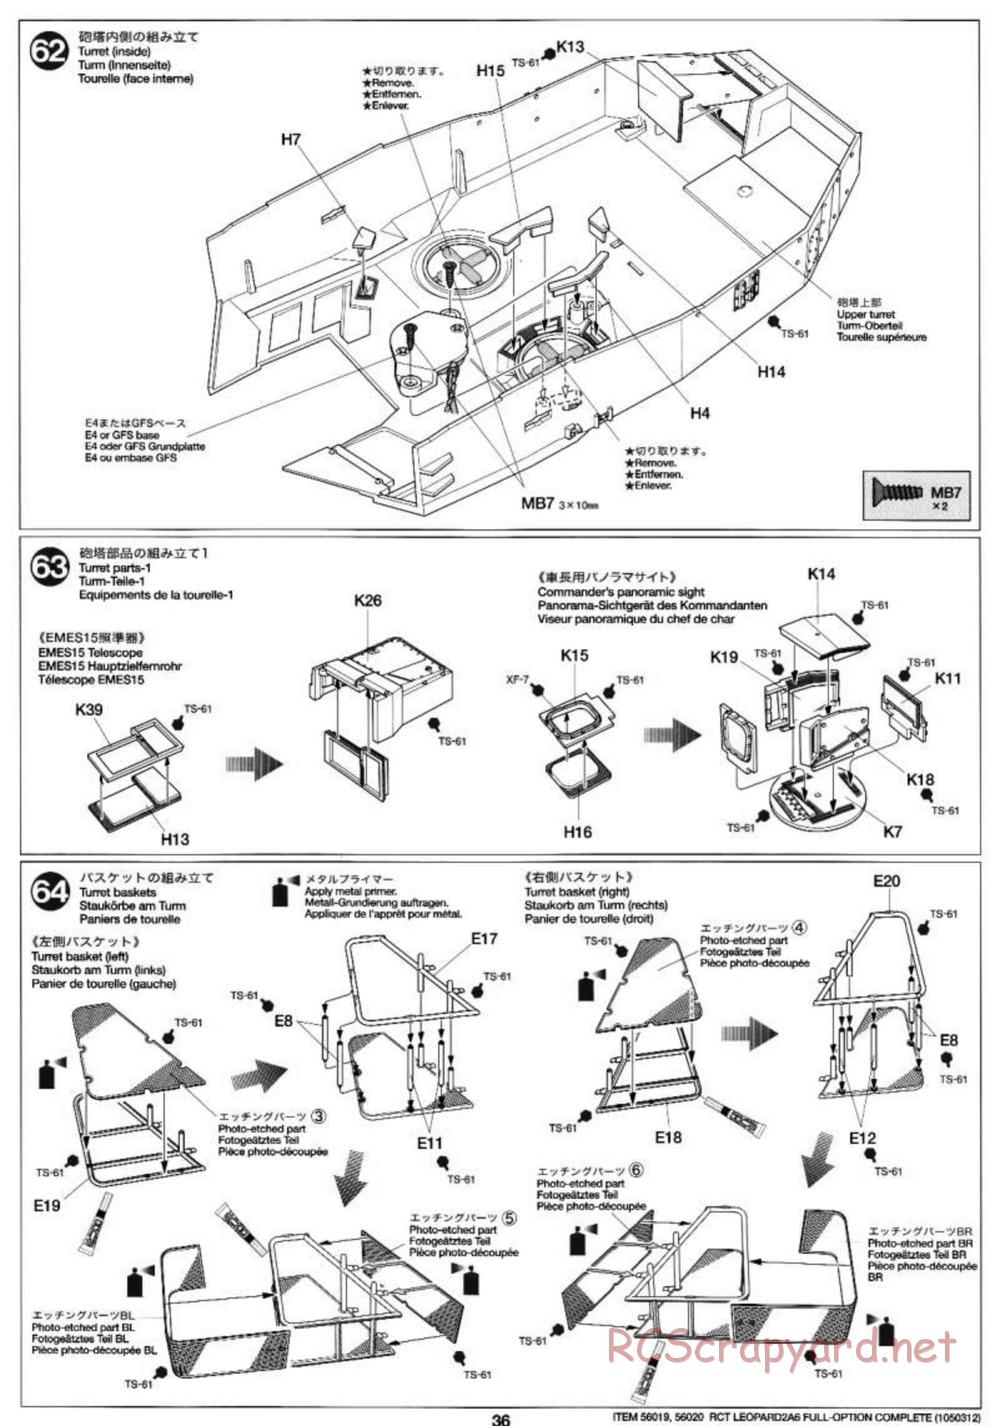 Tamiya - Leopard 2 A6 - 1/16 Scale Chassis - Manual - Page 36